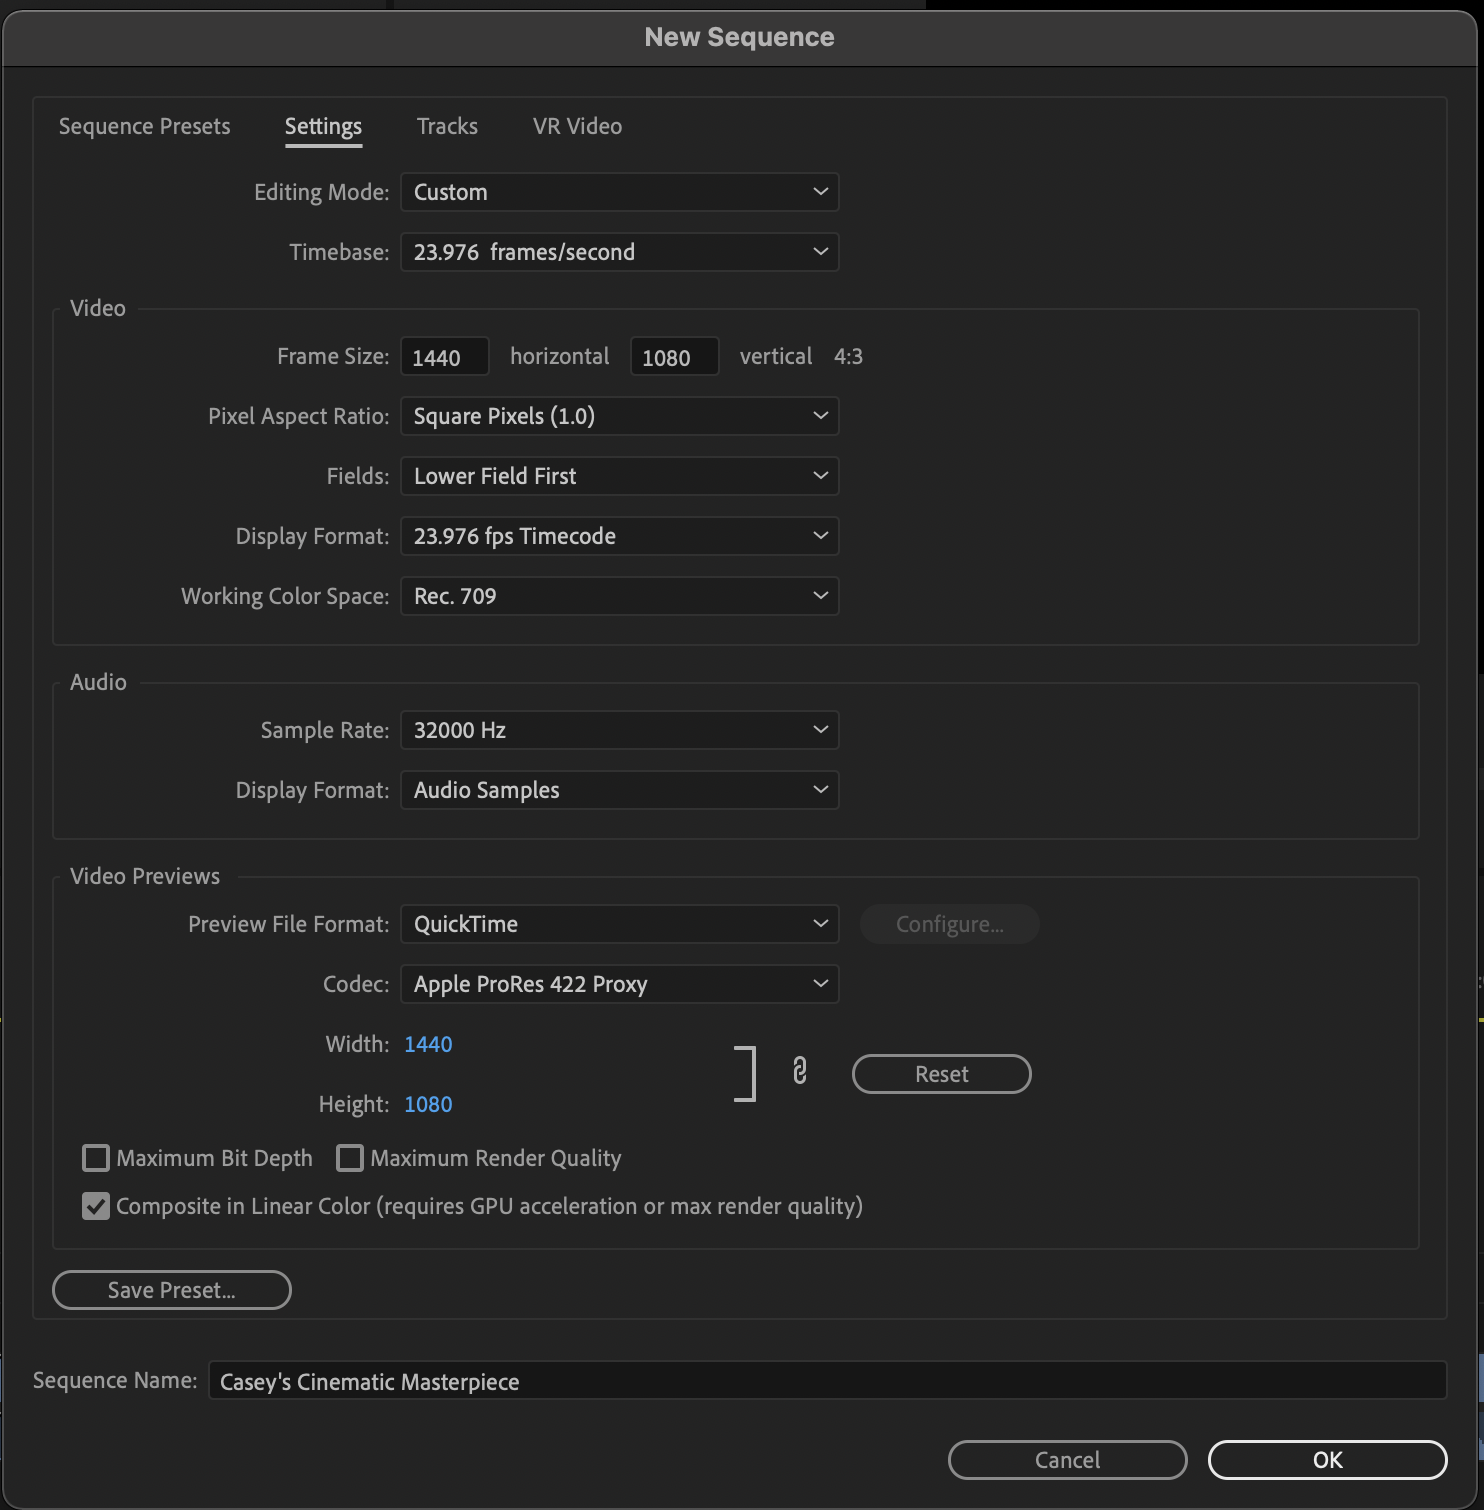 Premiere's Sequence Settings